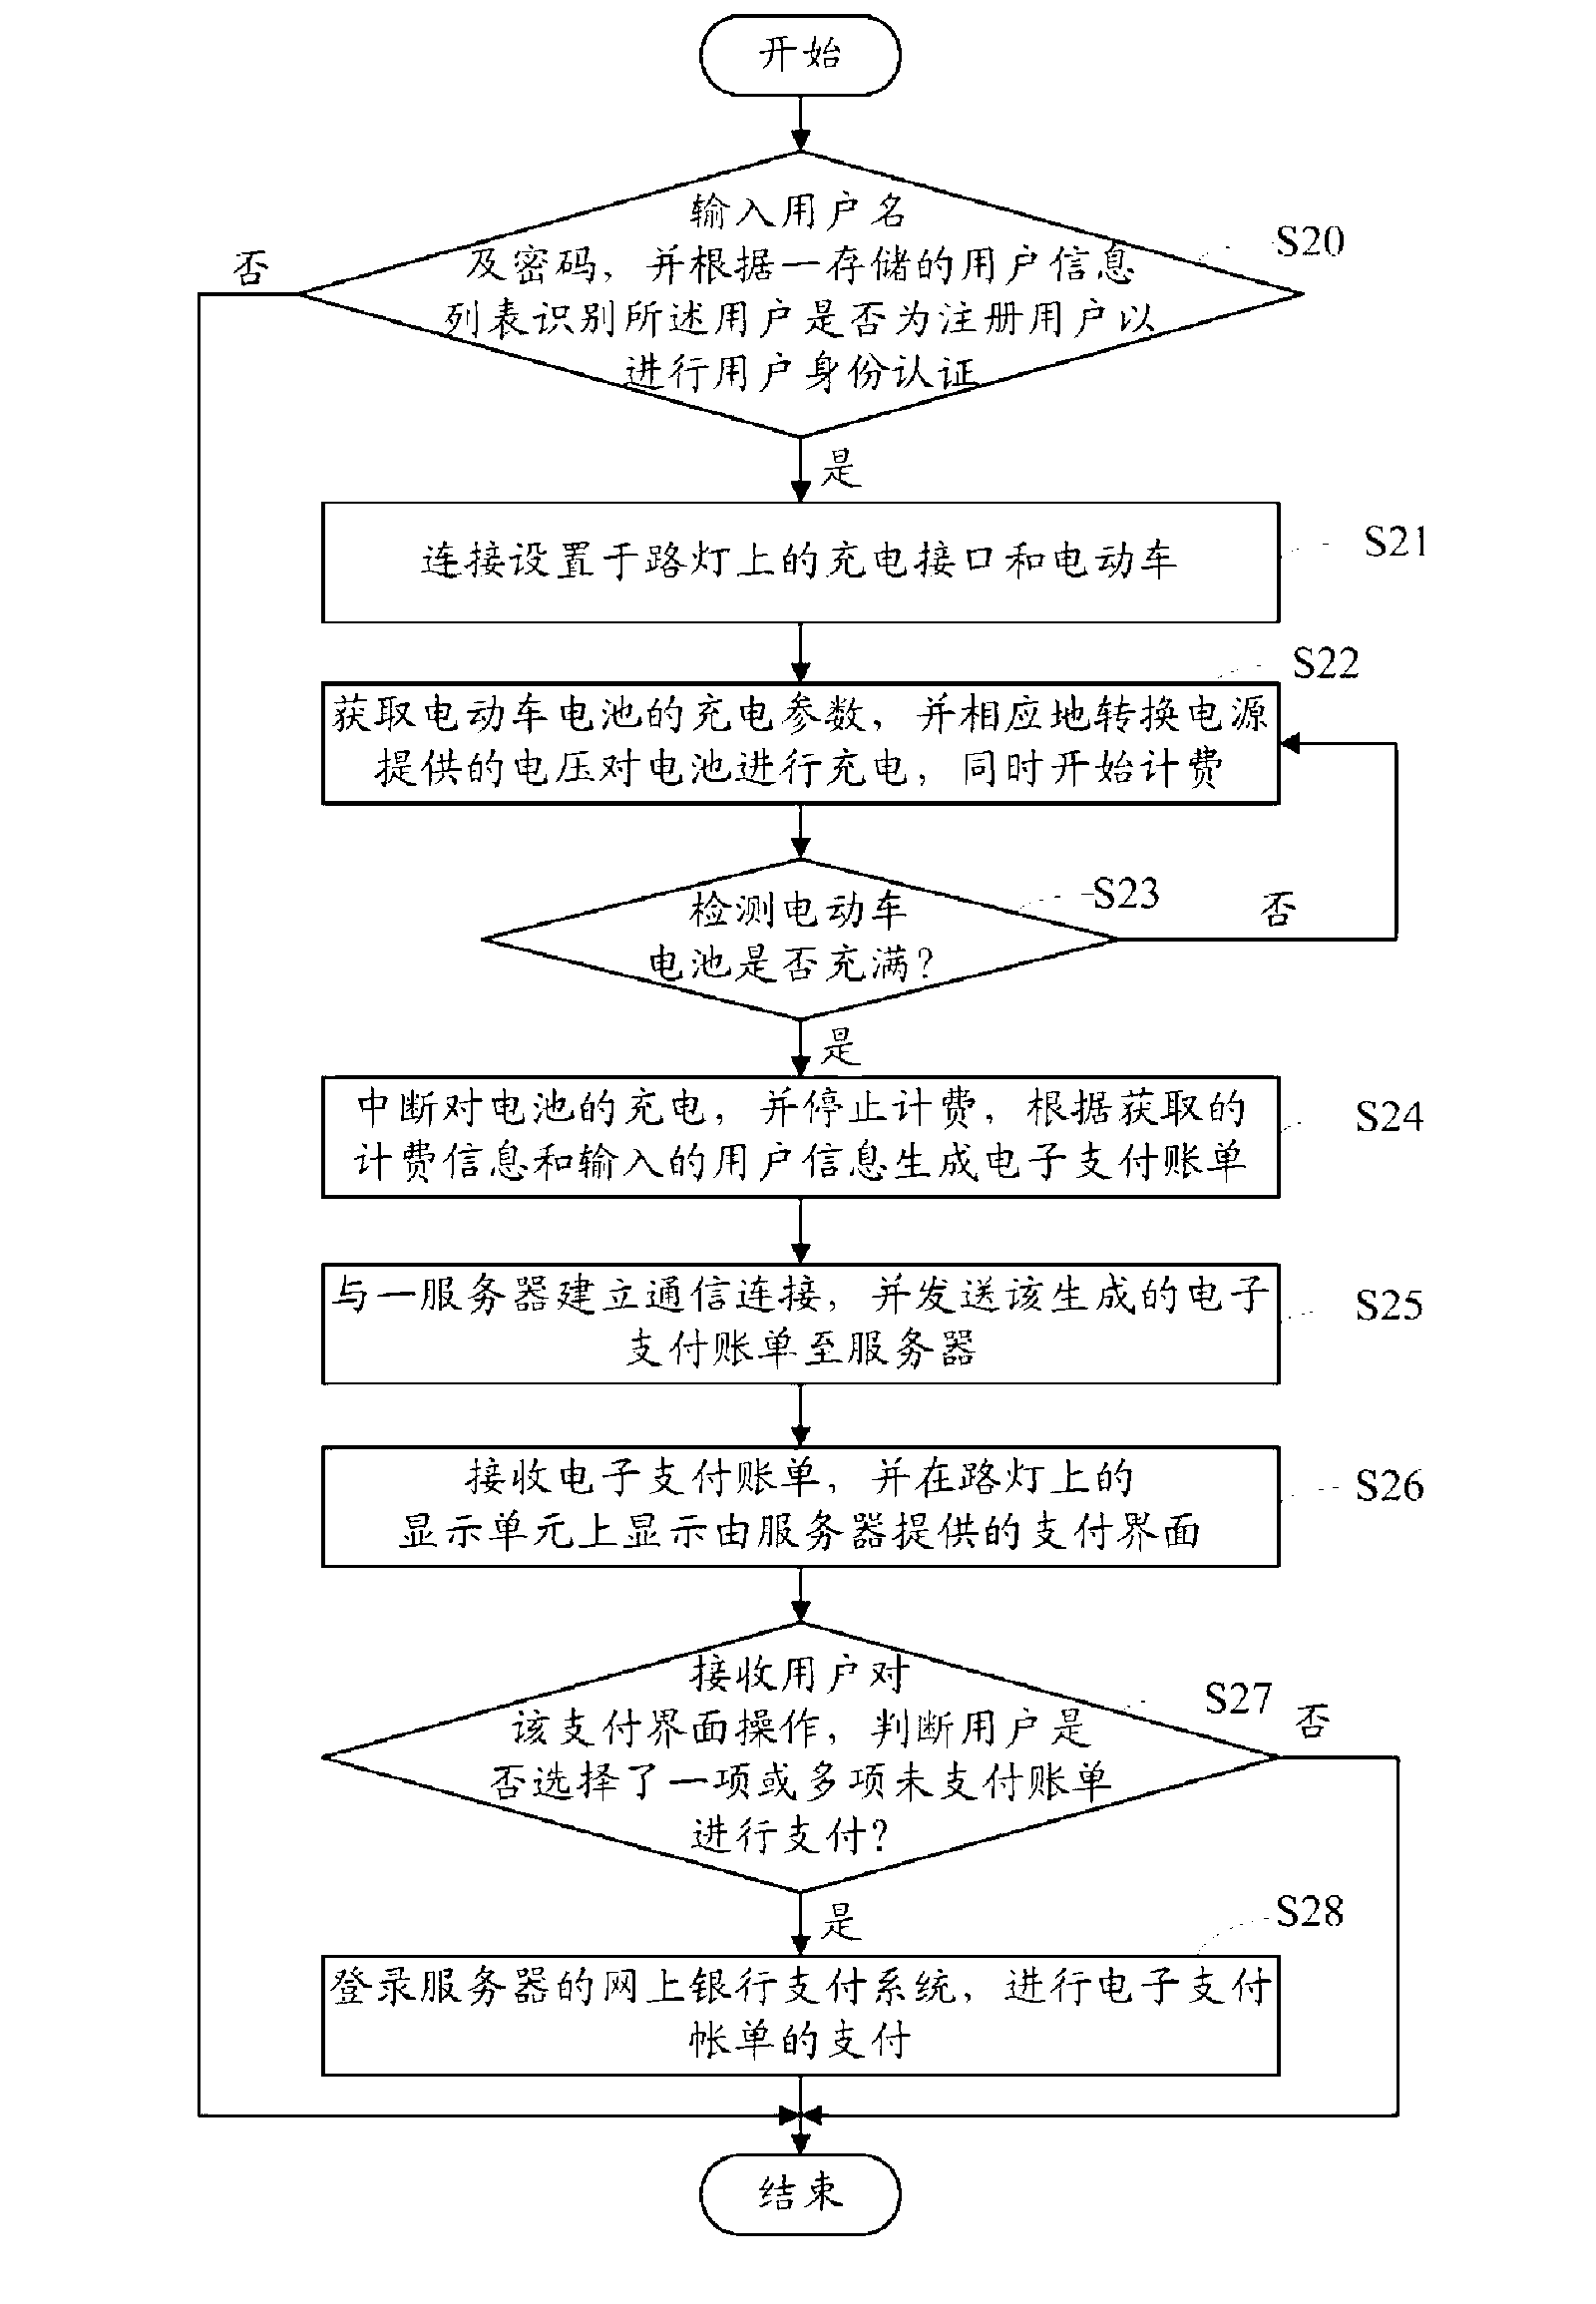 Public charging management system and charging method